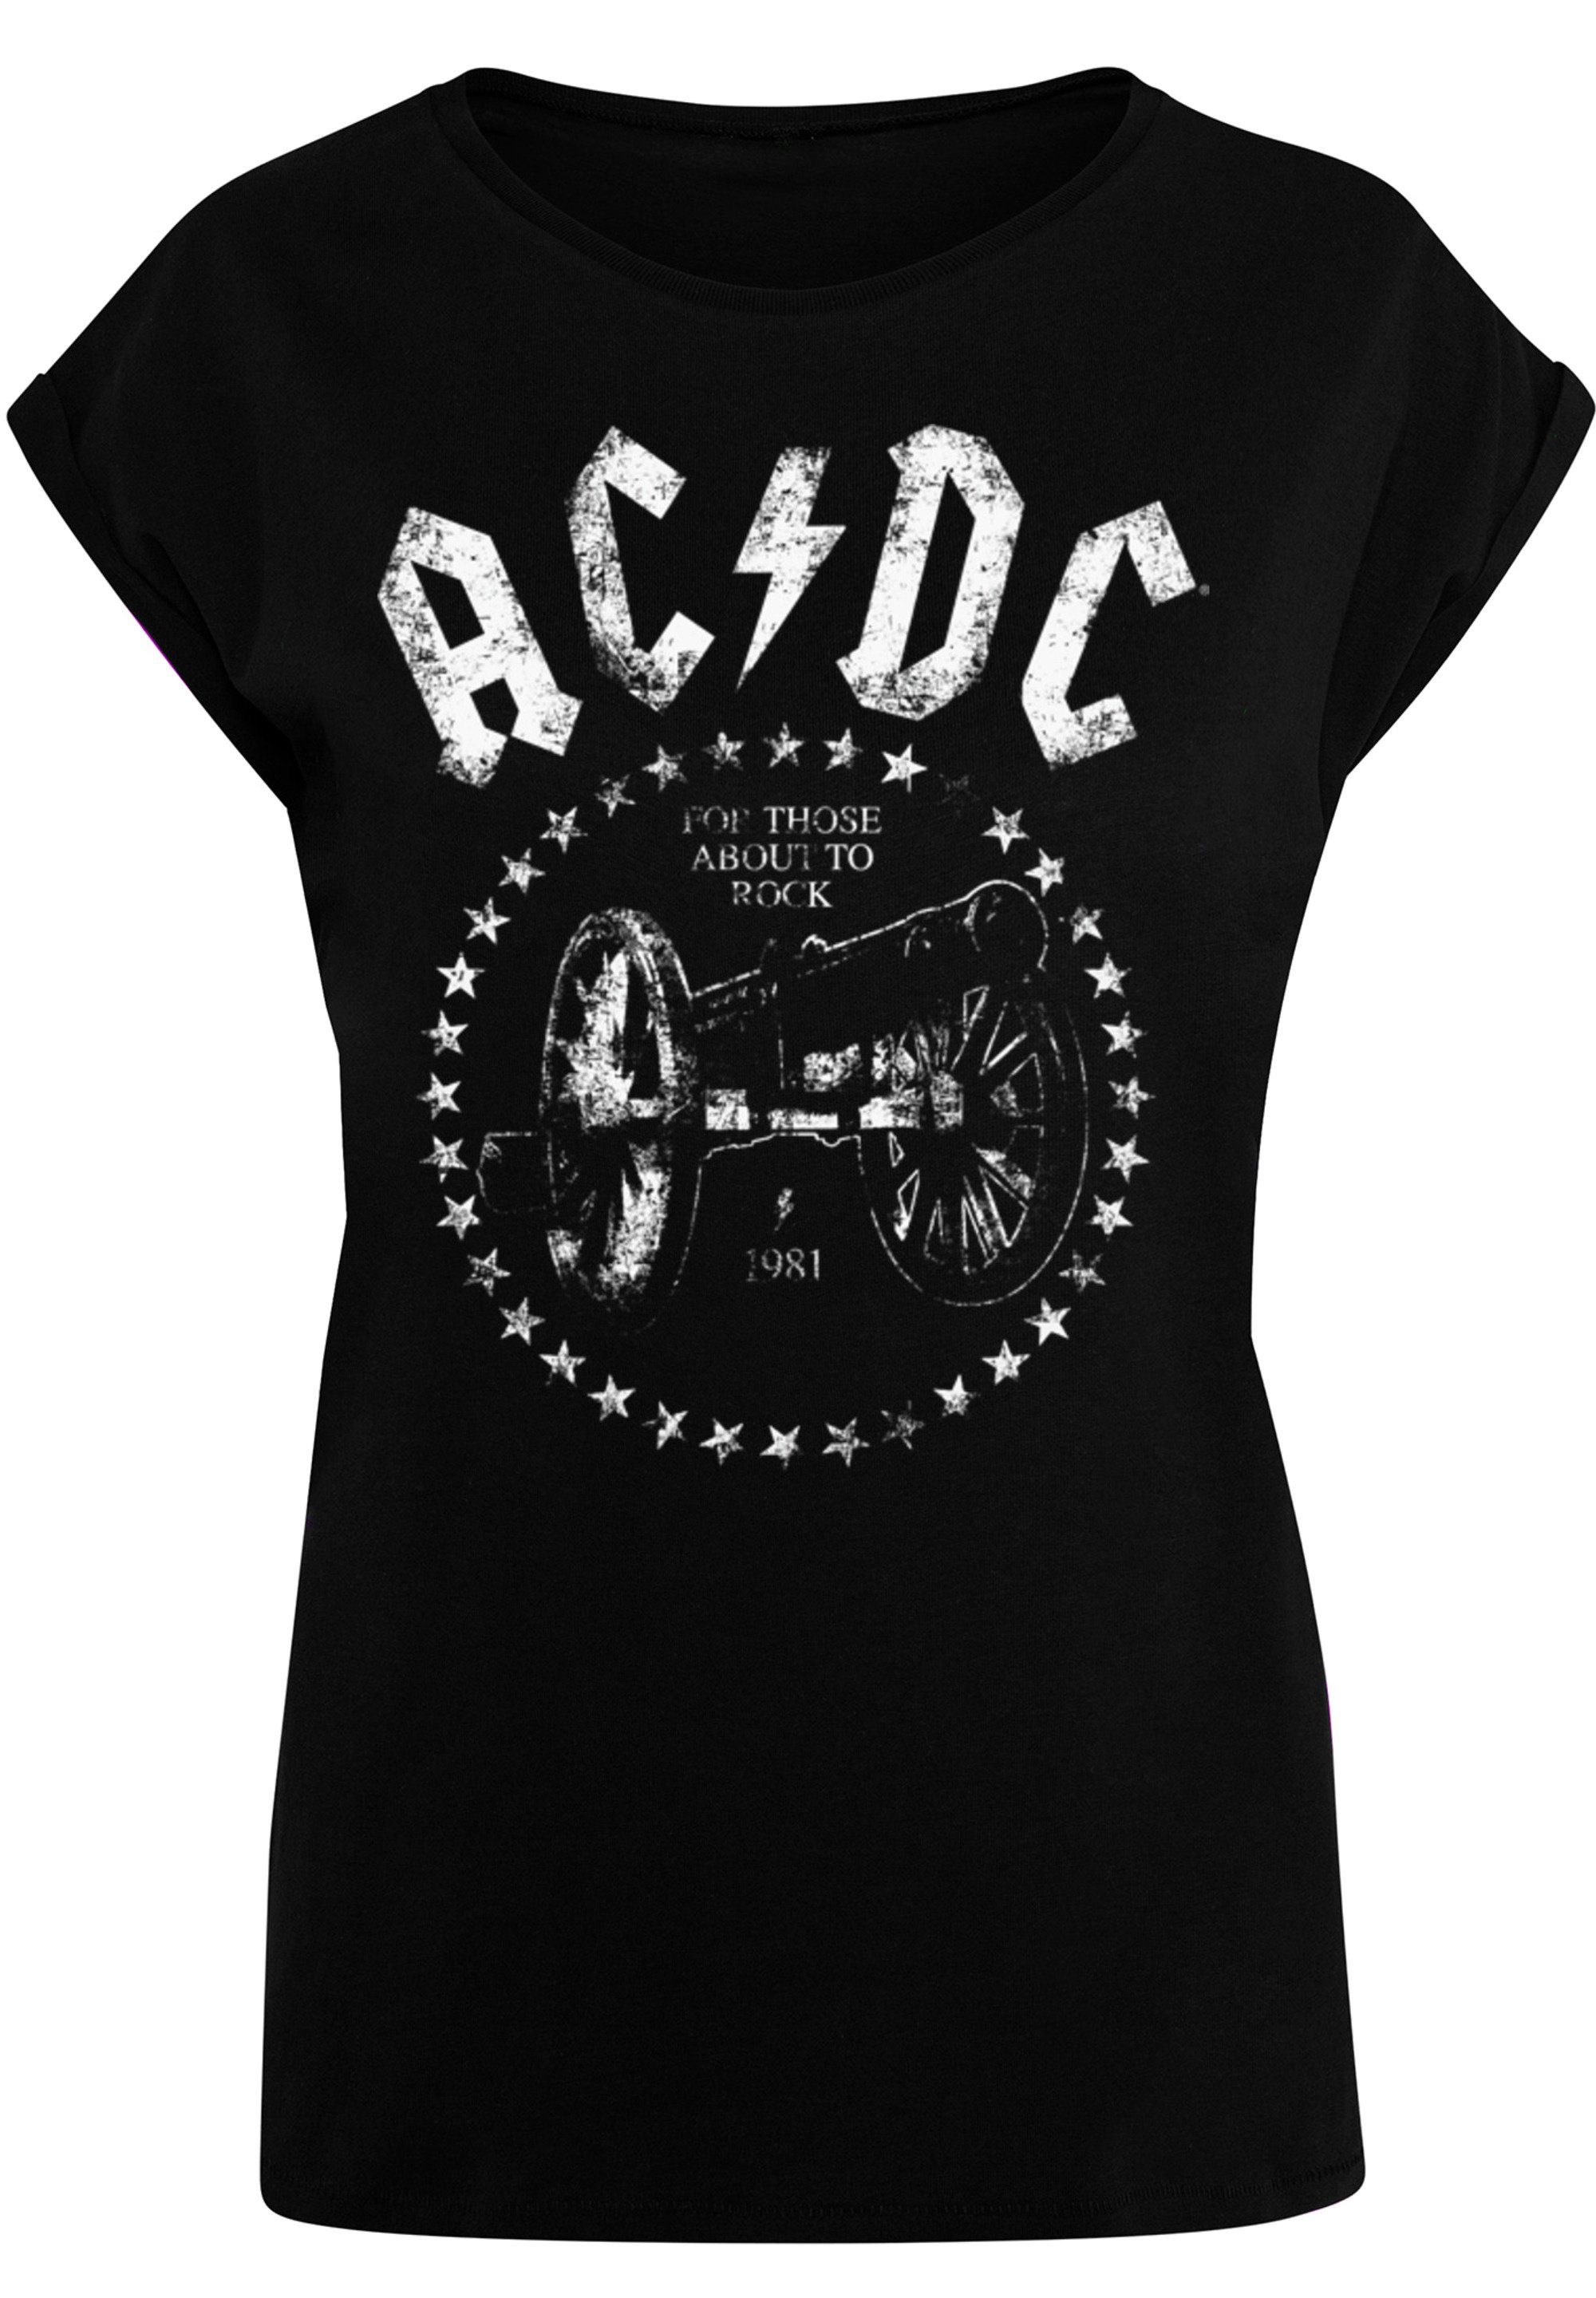 F4NT4STIC PLUS Print You Cannon We Salute ACDC T-Shirt SIZE